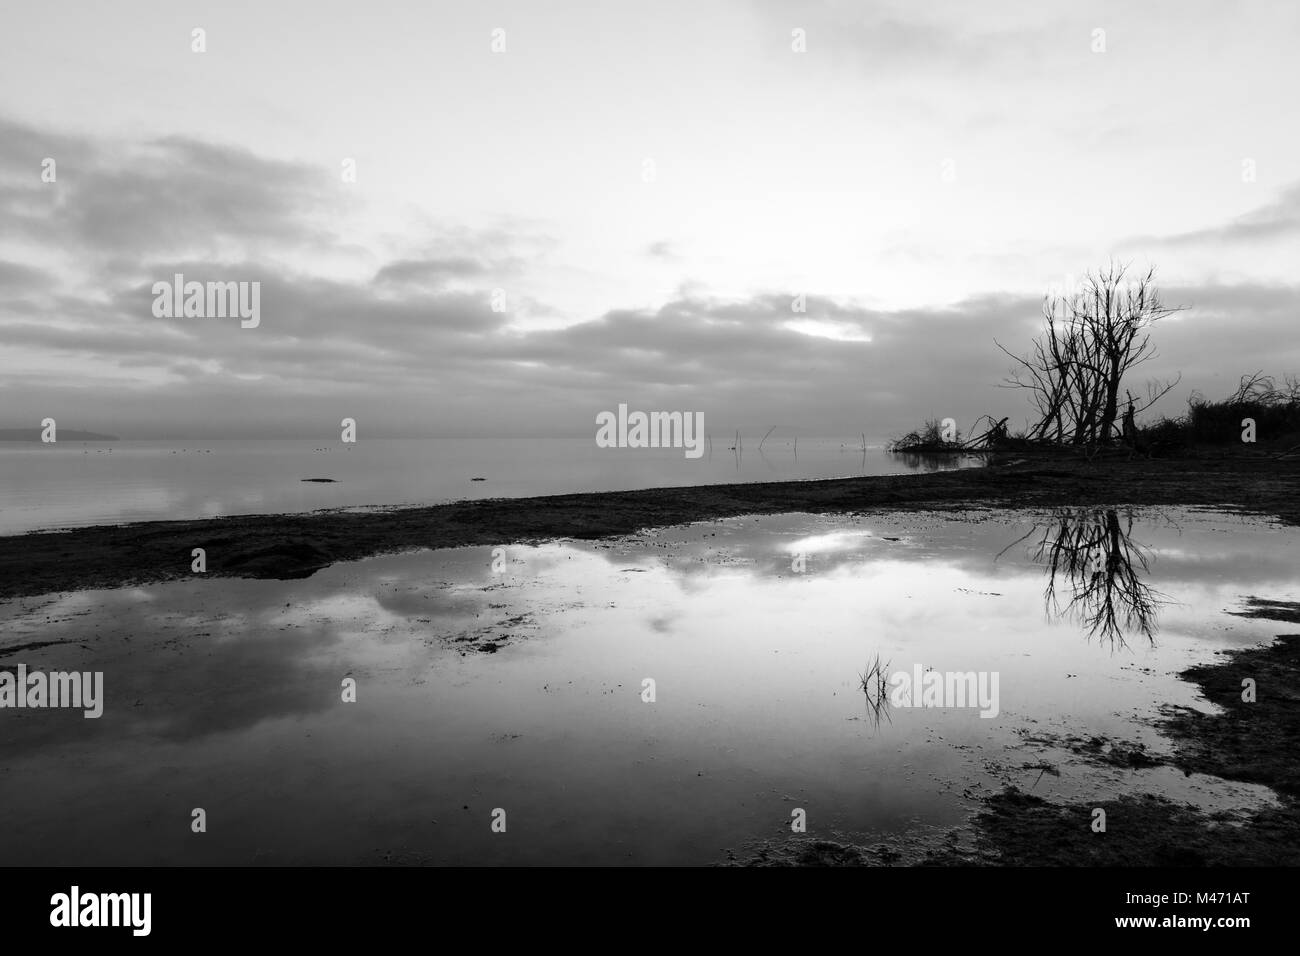 A lake shore at dawn, with beautiful tree and sky reflections on water Stock Photo